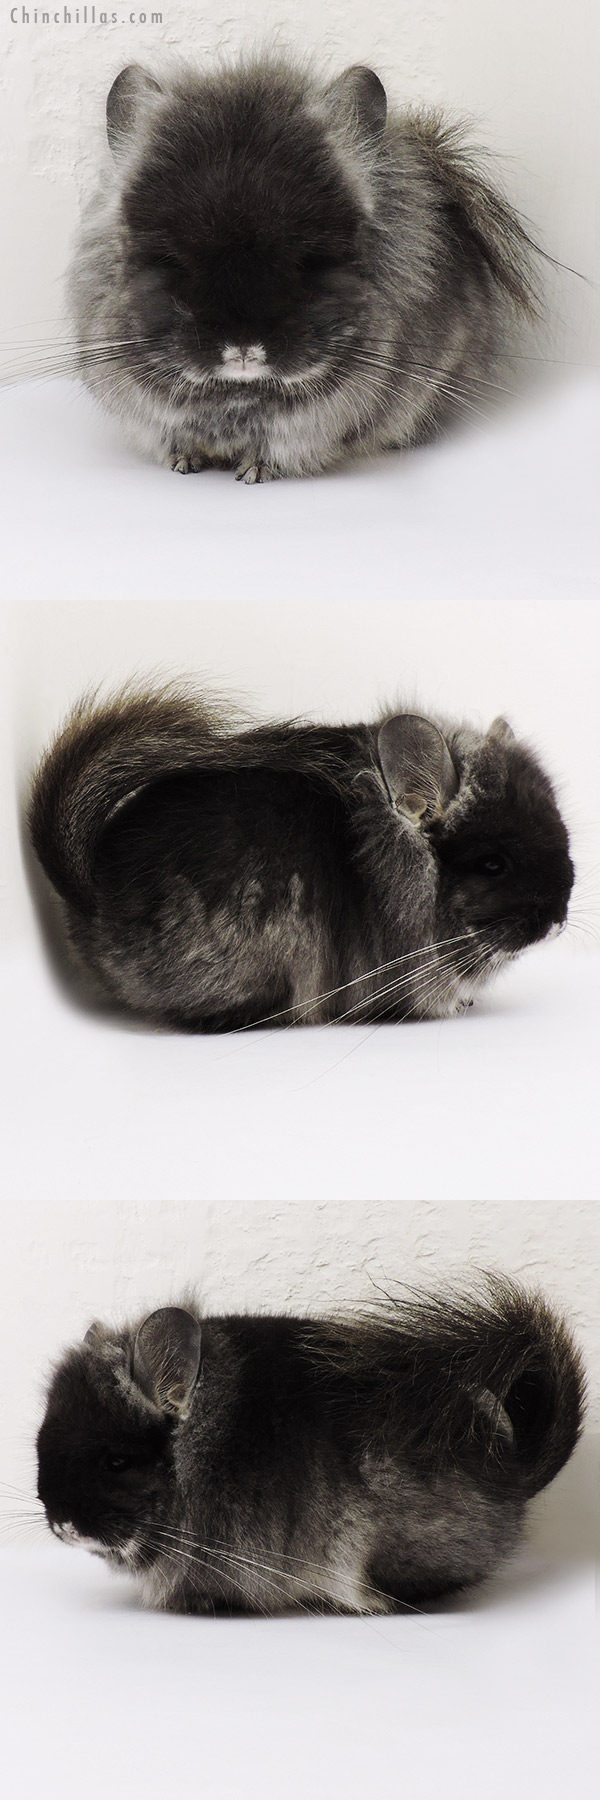 Chinchilla or related item offered for sale or export on Chinchillas.com - 15229 Exceptional Black Velvet  Royal Persian Angora Male Chinchilla w/ Lion Mane & Ear Tufts